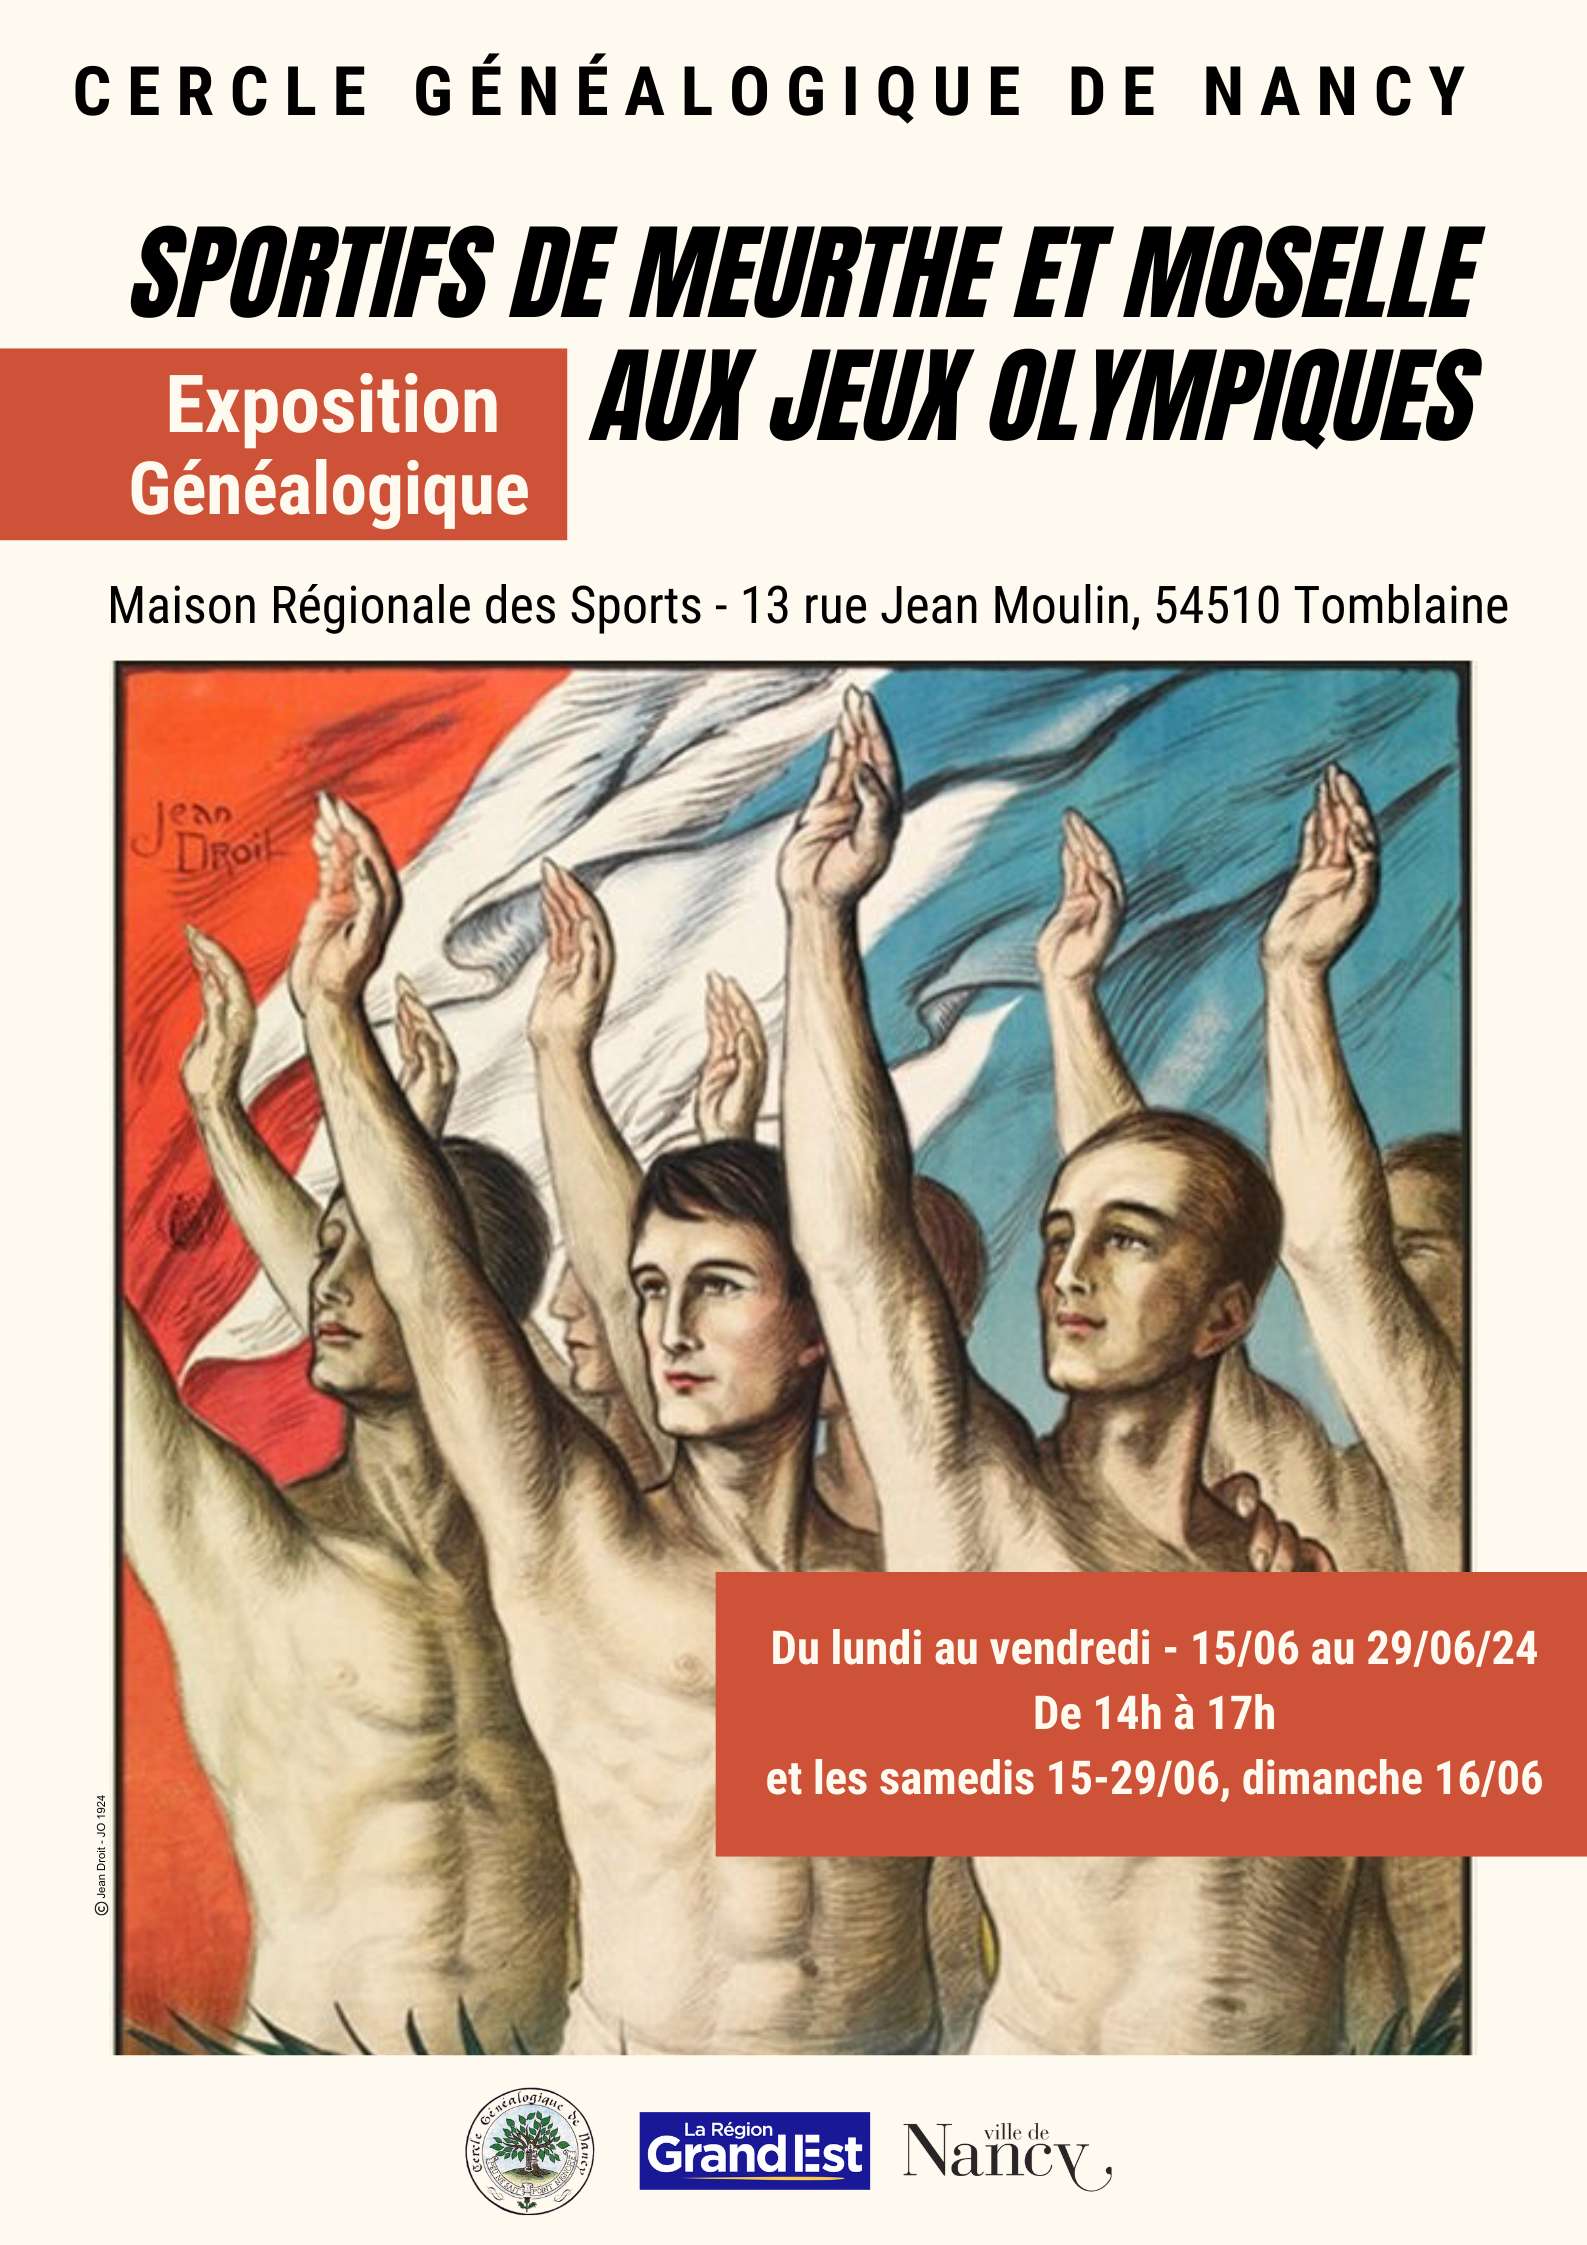 1- AFFICHE EXPO